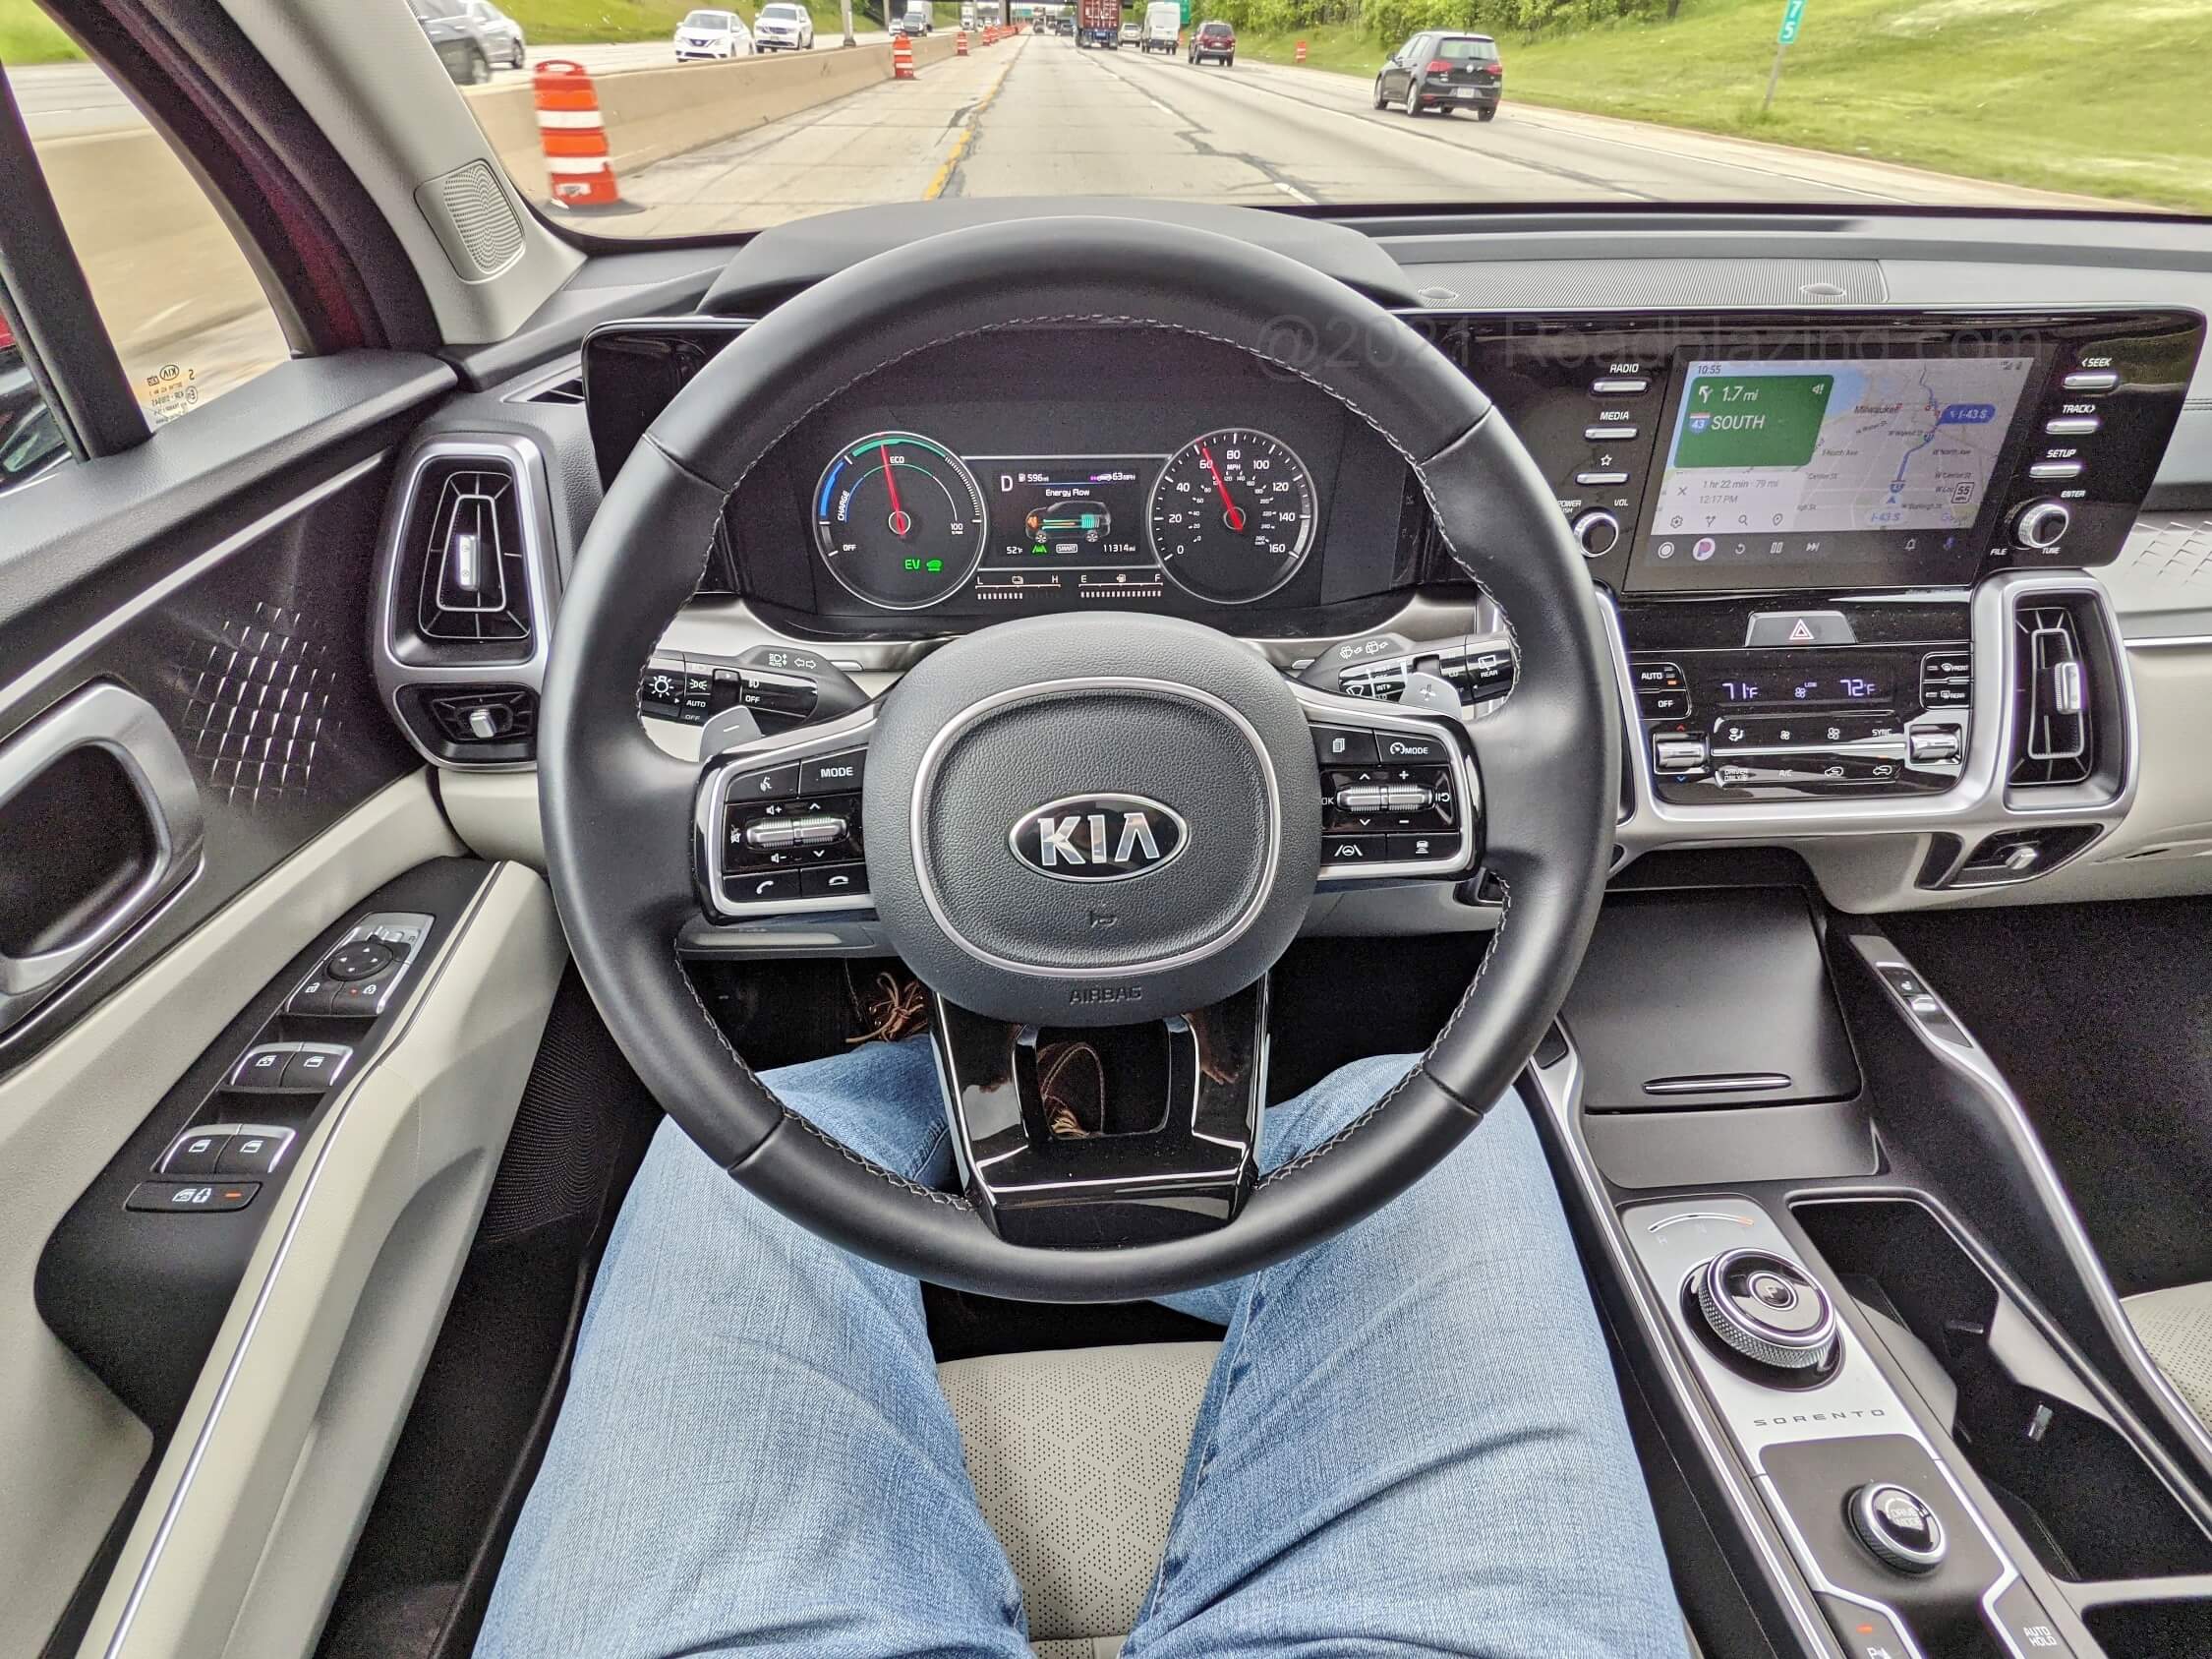 2021 Kia Sorento HEV EX 1.6T Hybrid: driver's view of 4.2" trip display running Android Auto navigation in the 8.0" touch tri-pane LCD media display